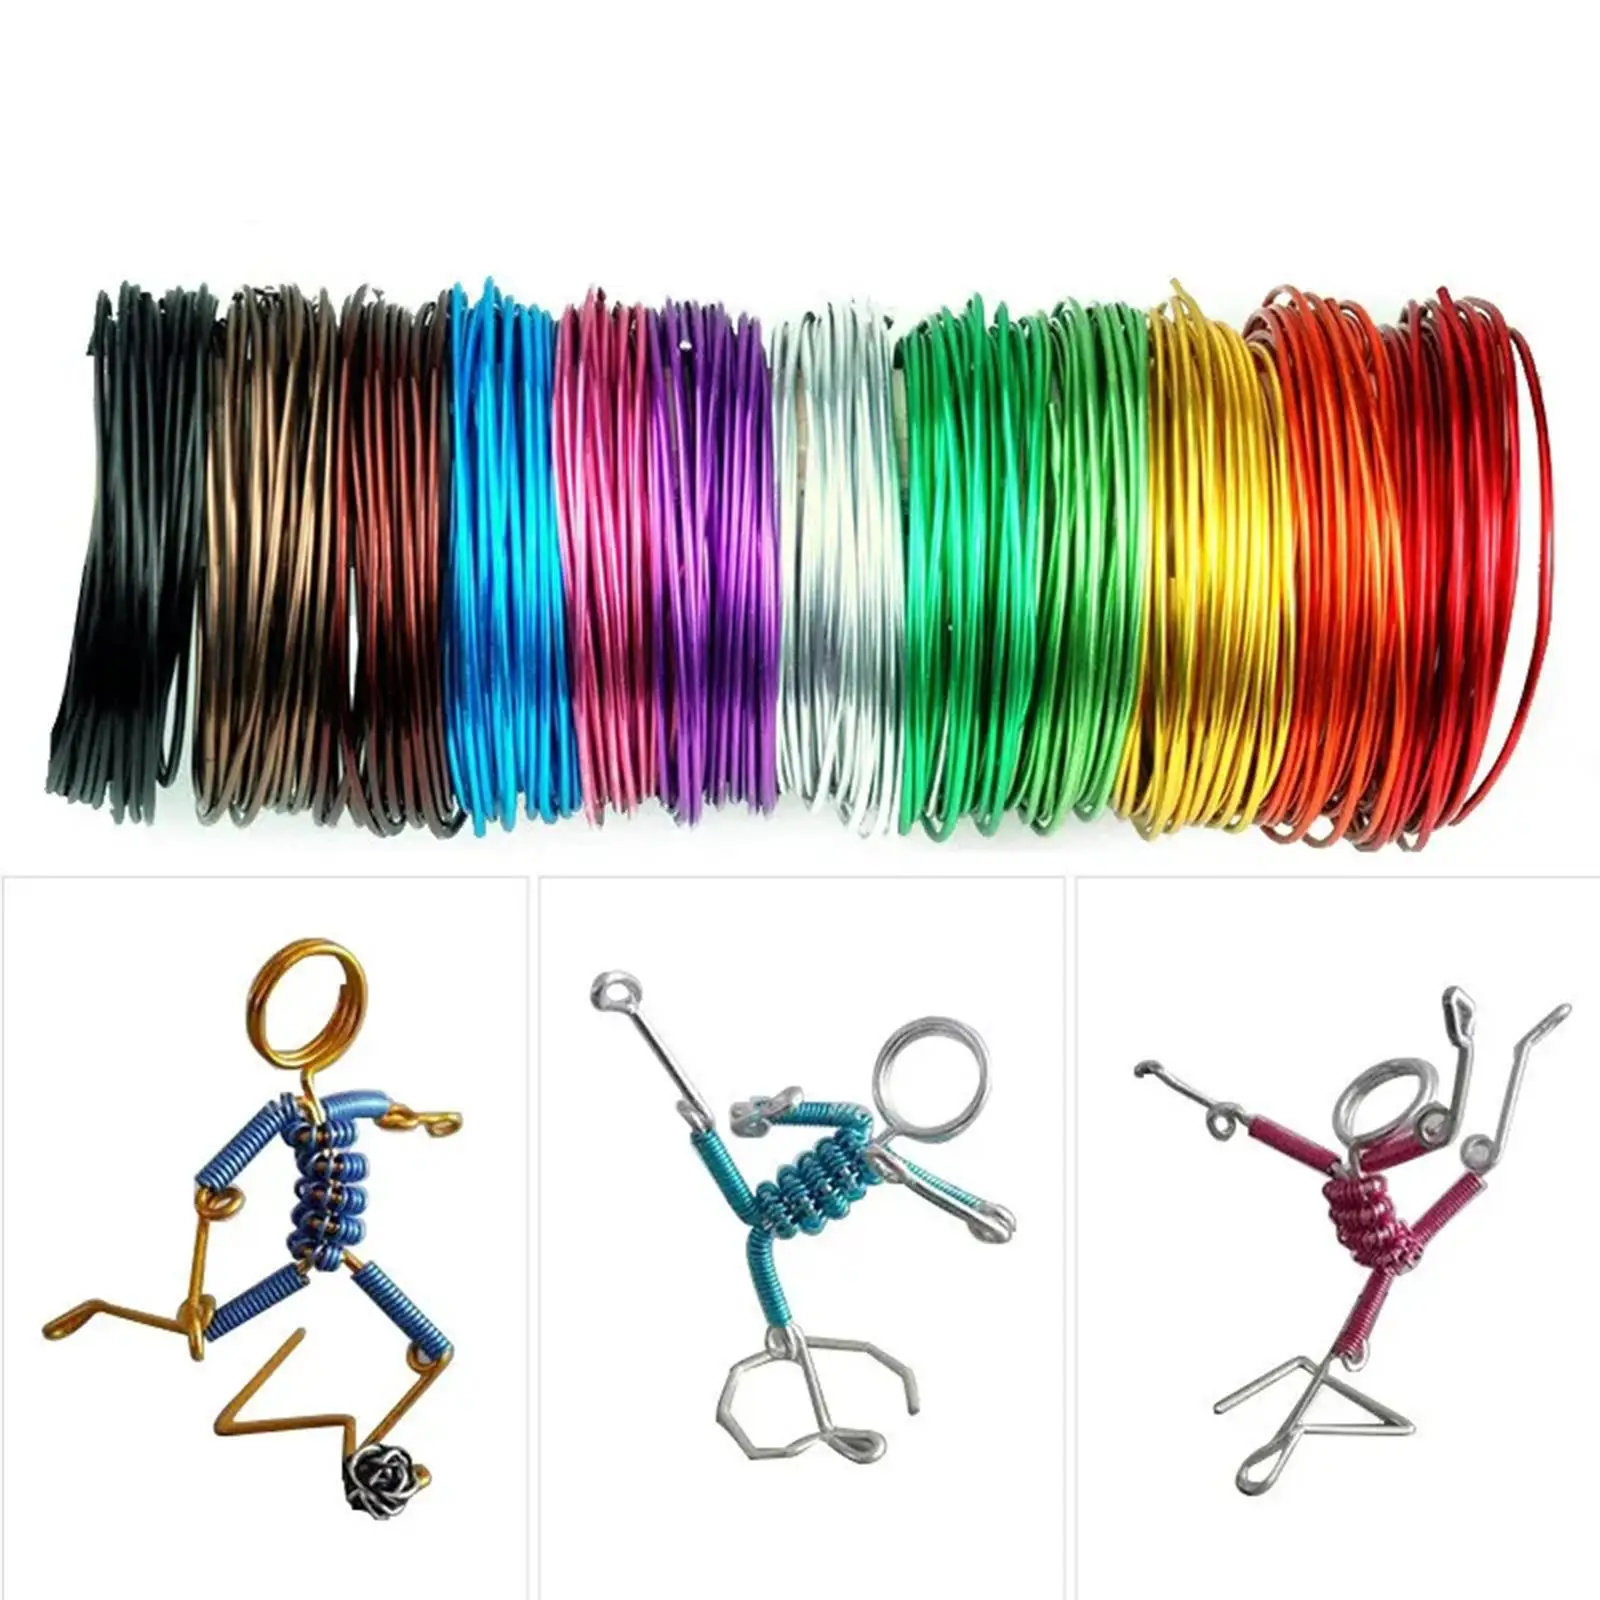 

12Pcs Aluminium Wire 10M Long Colored Cord 1mm Craft Cord for Modeling Wreath Floral Making Wrapping Doll Armature Bonsai Trees